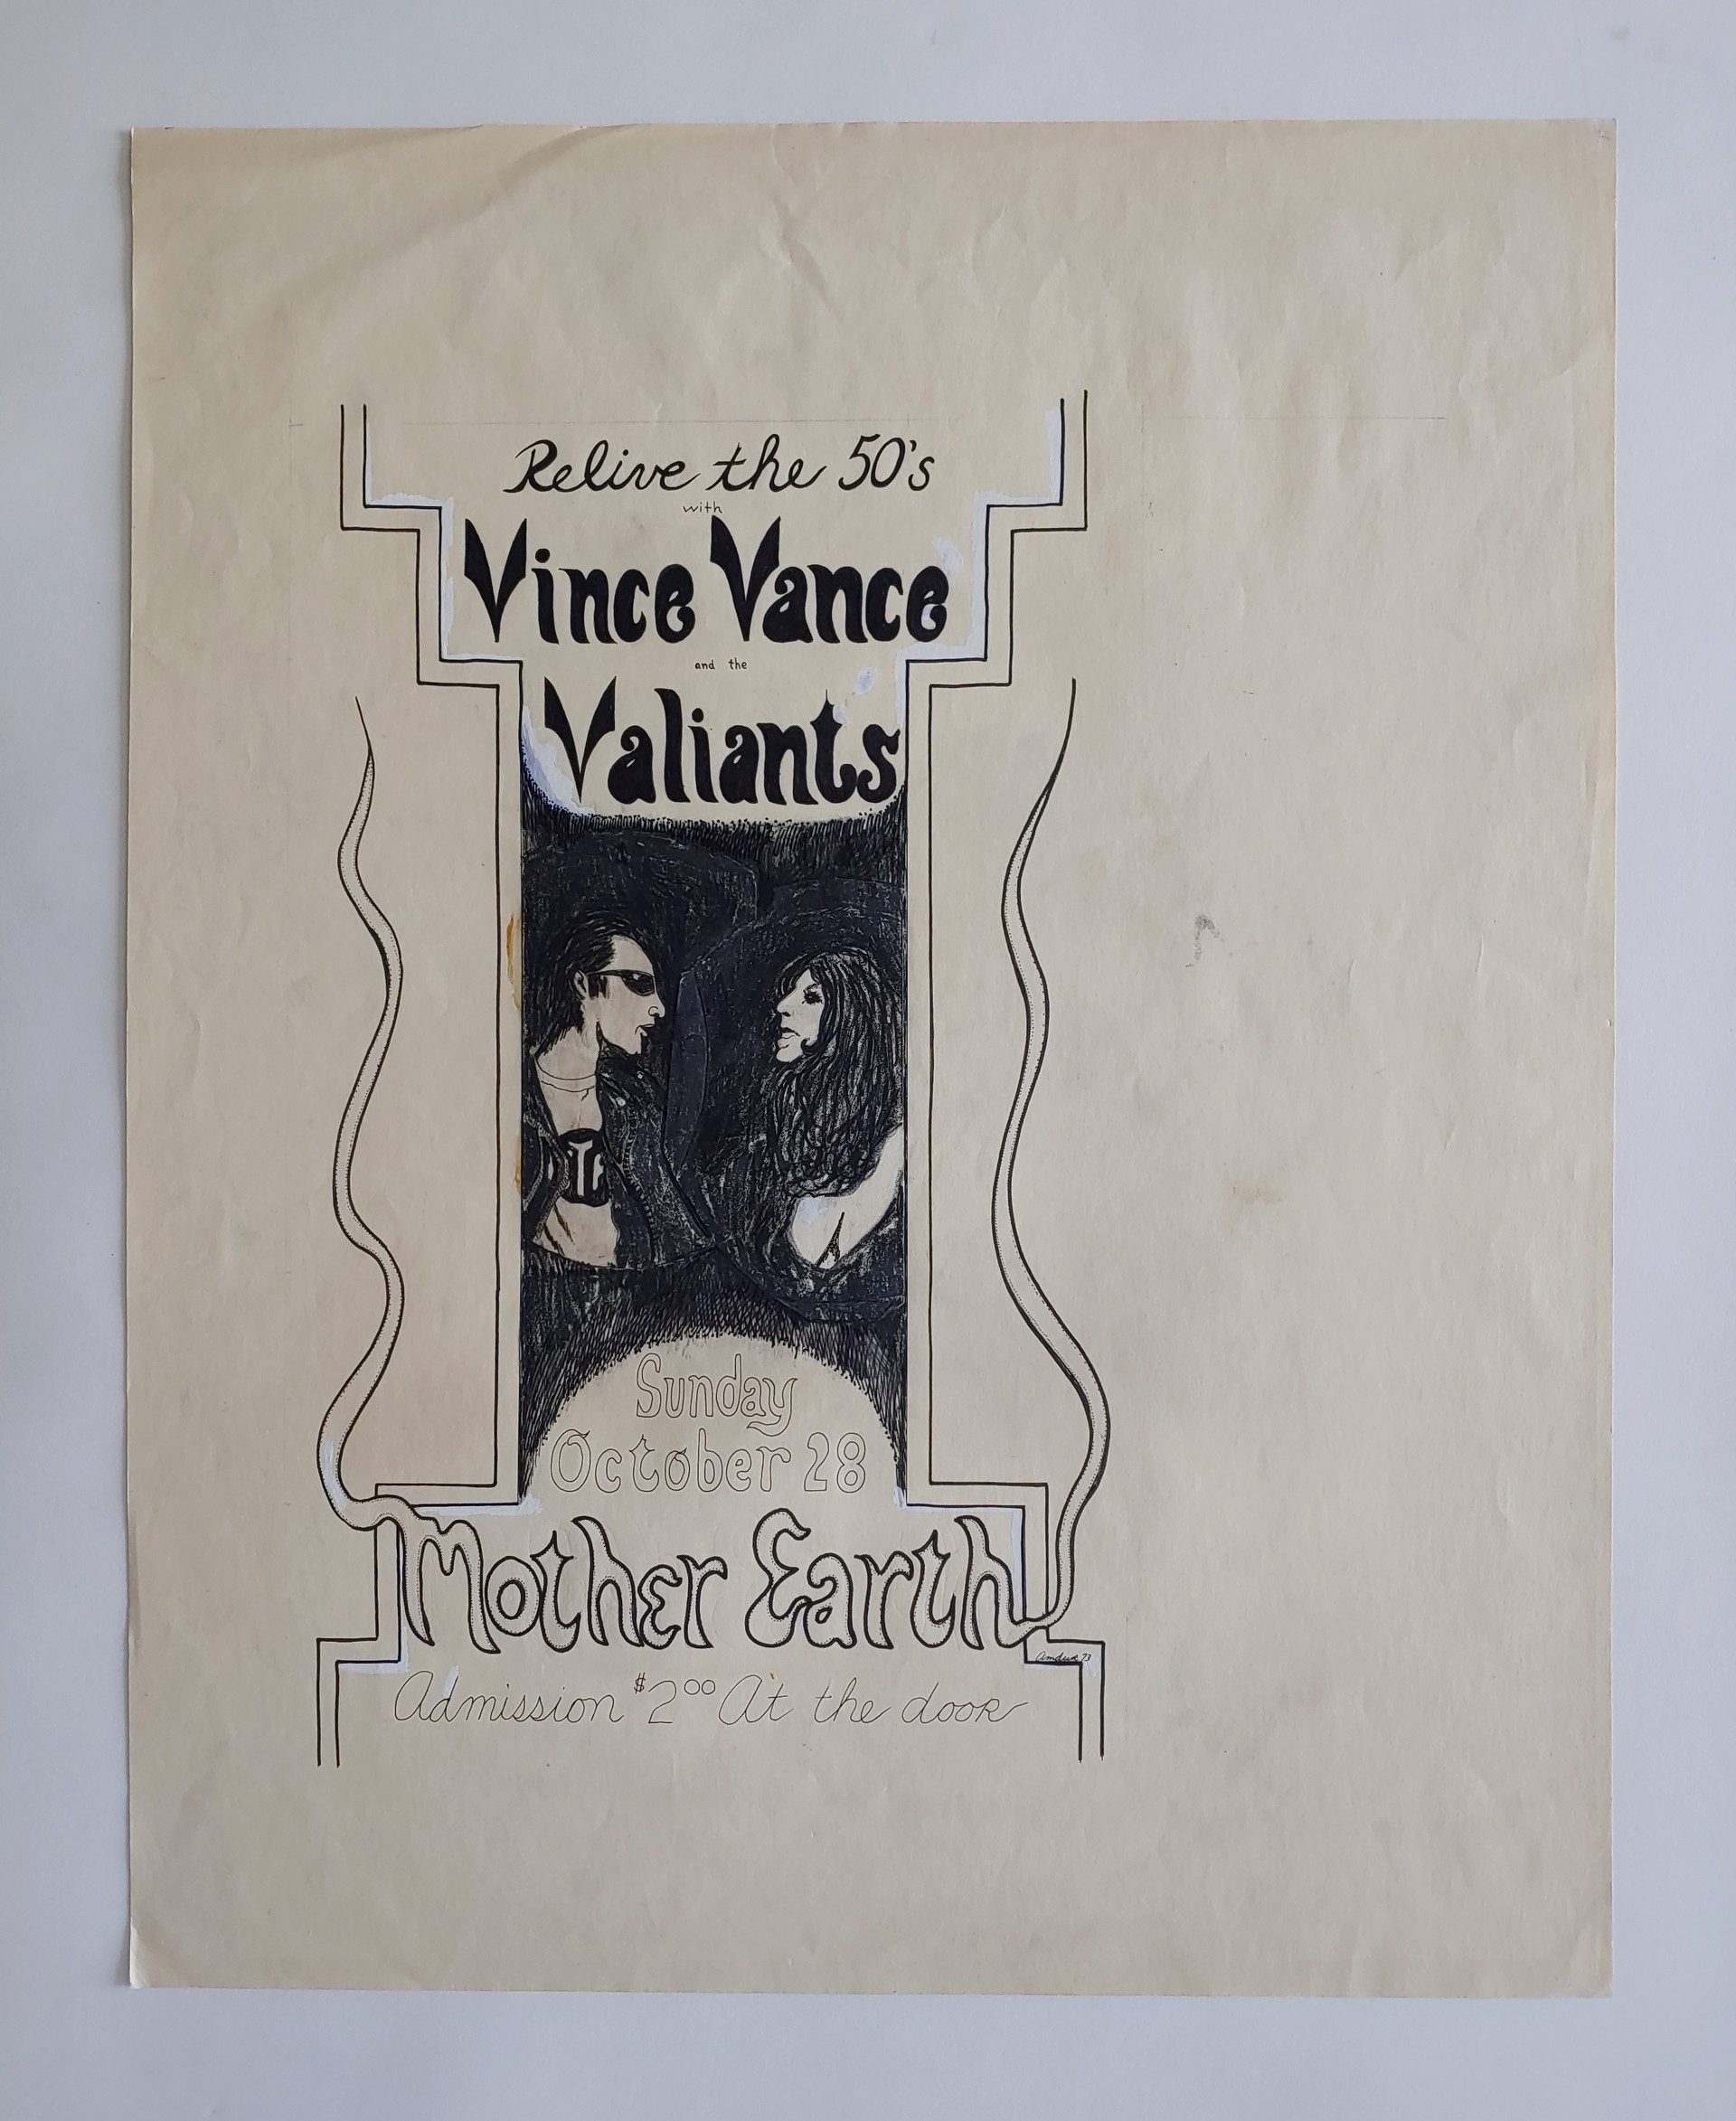 Relive the 50's Posters - original drawing & 2 known prints, collection by David Amdur